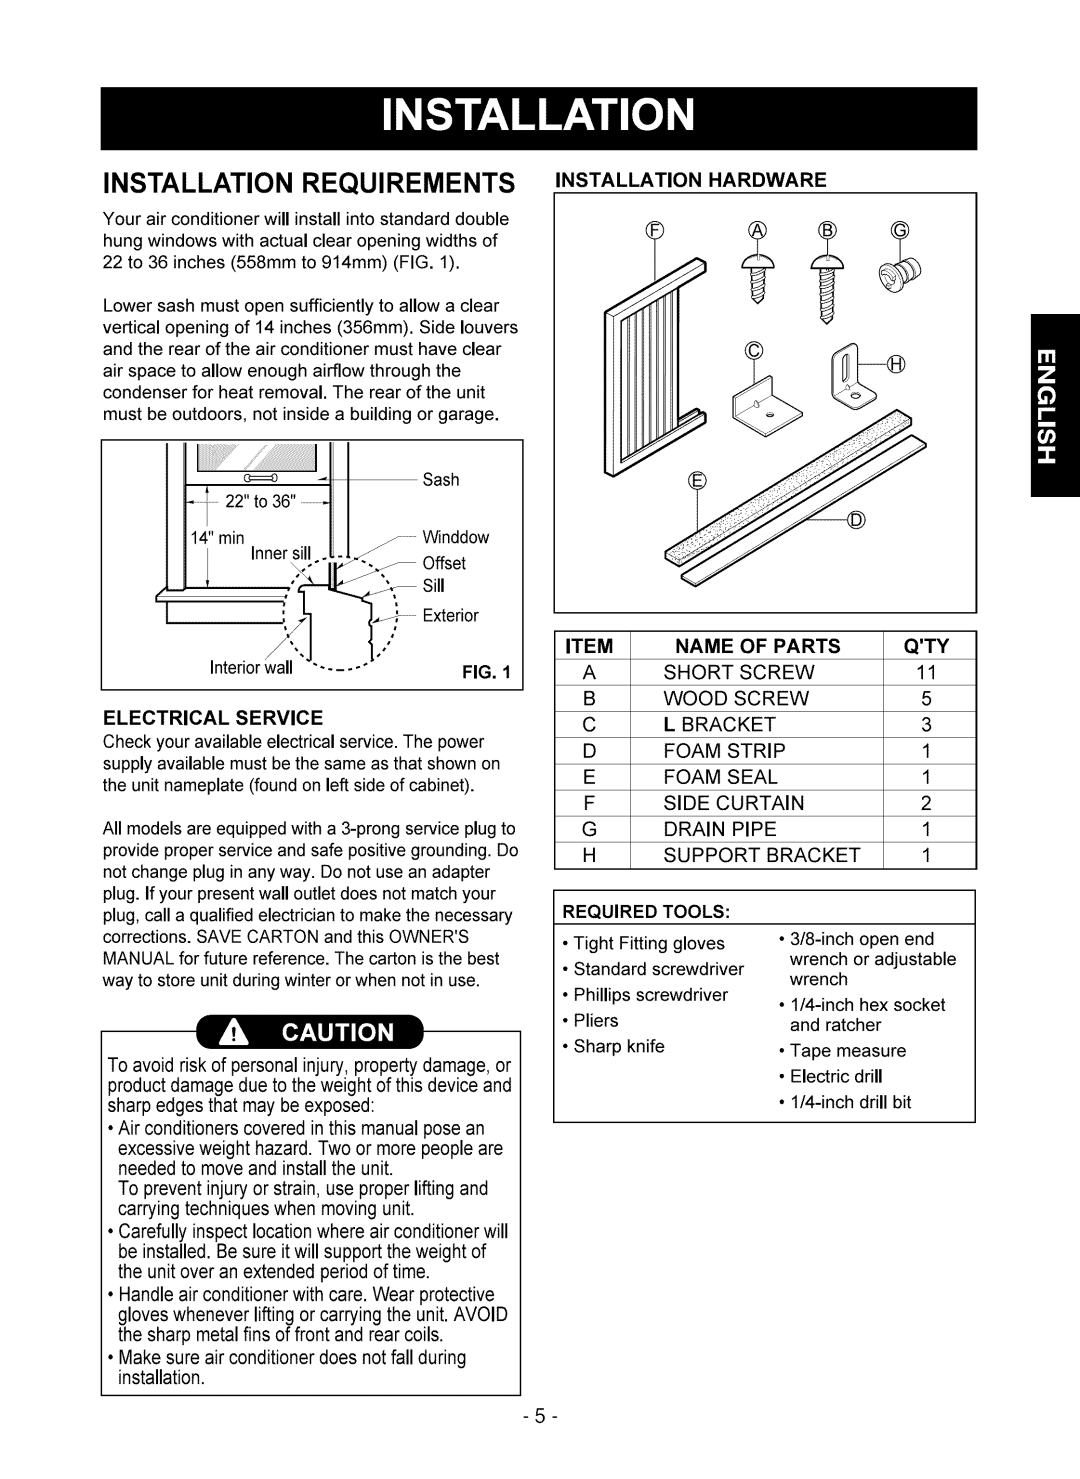 Kenmore 580.75051 owner manual Installation Requirements Installation Hardware, Name Of Parts 